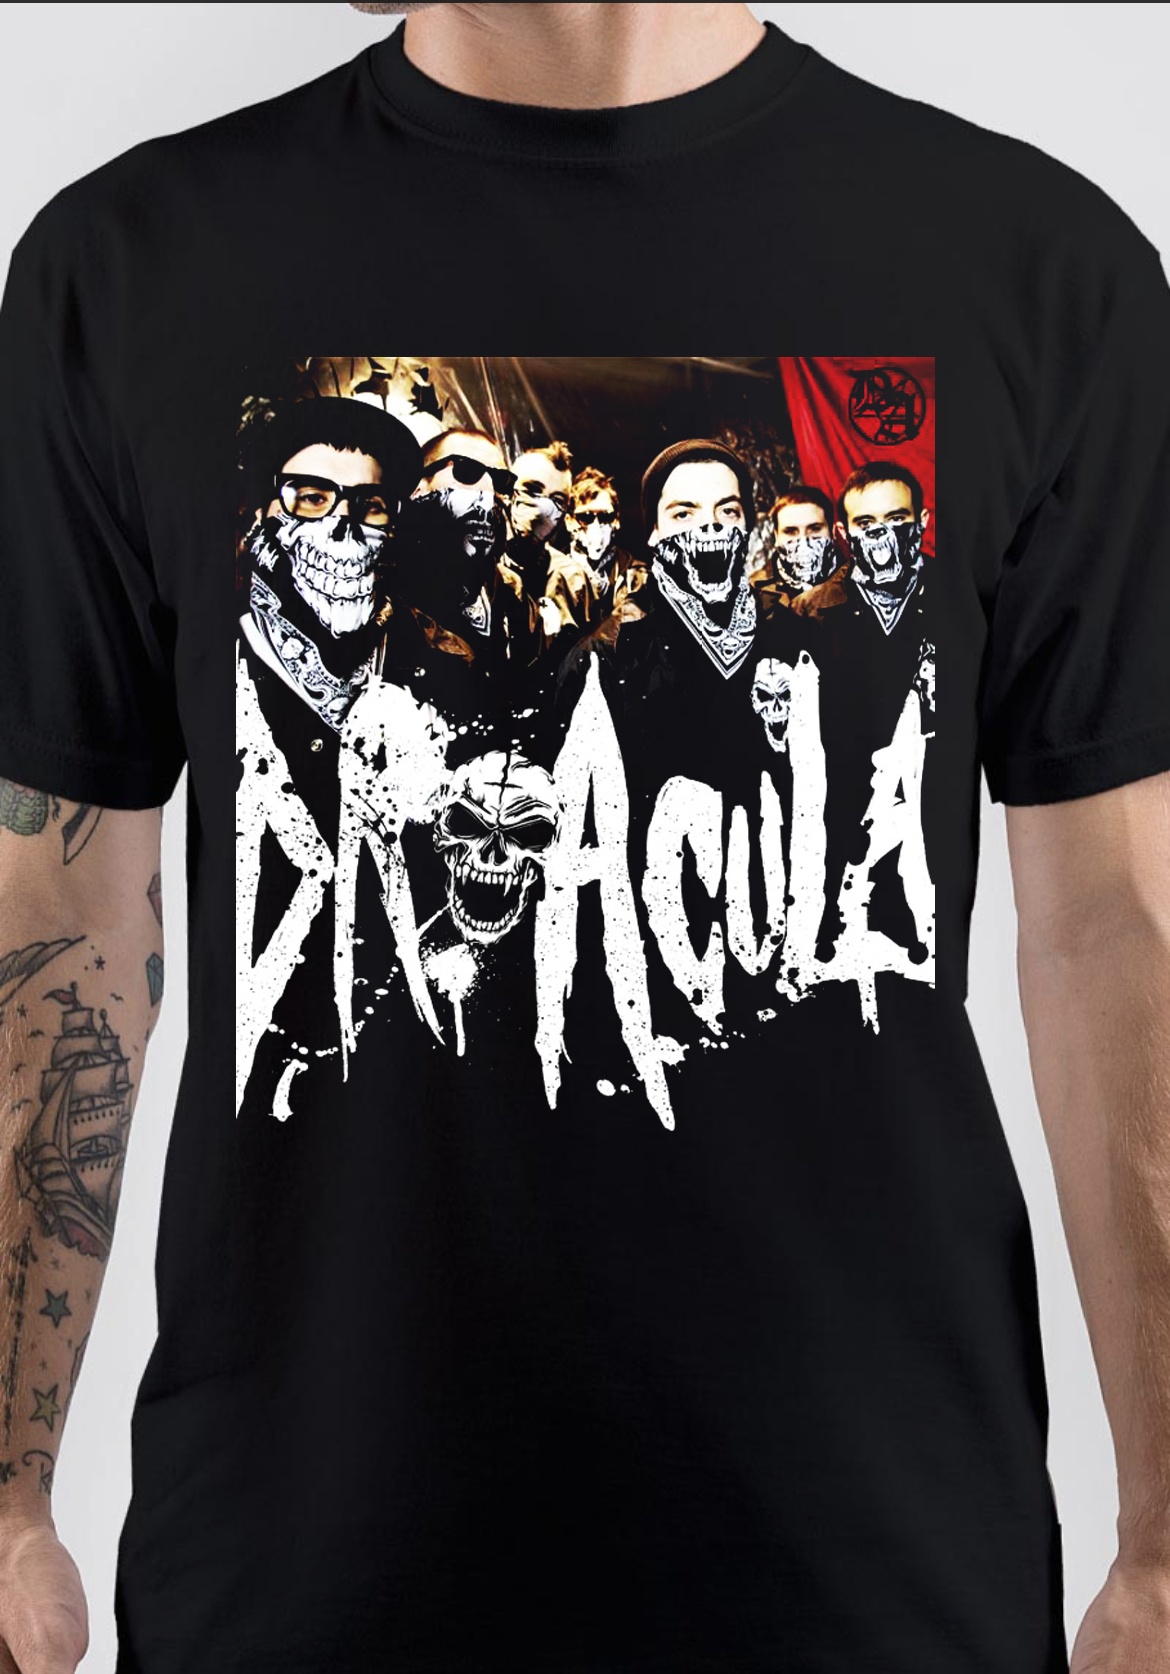 Dr. Acula T-Shirt And Merchandise